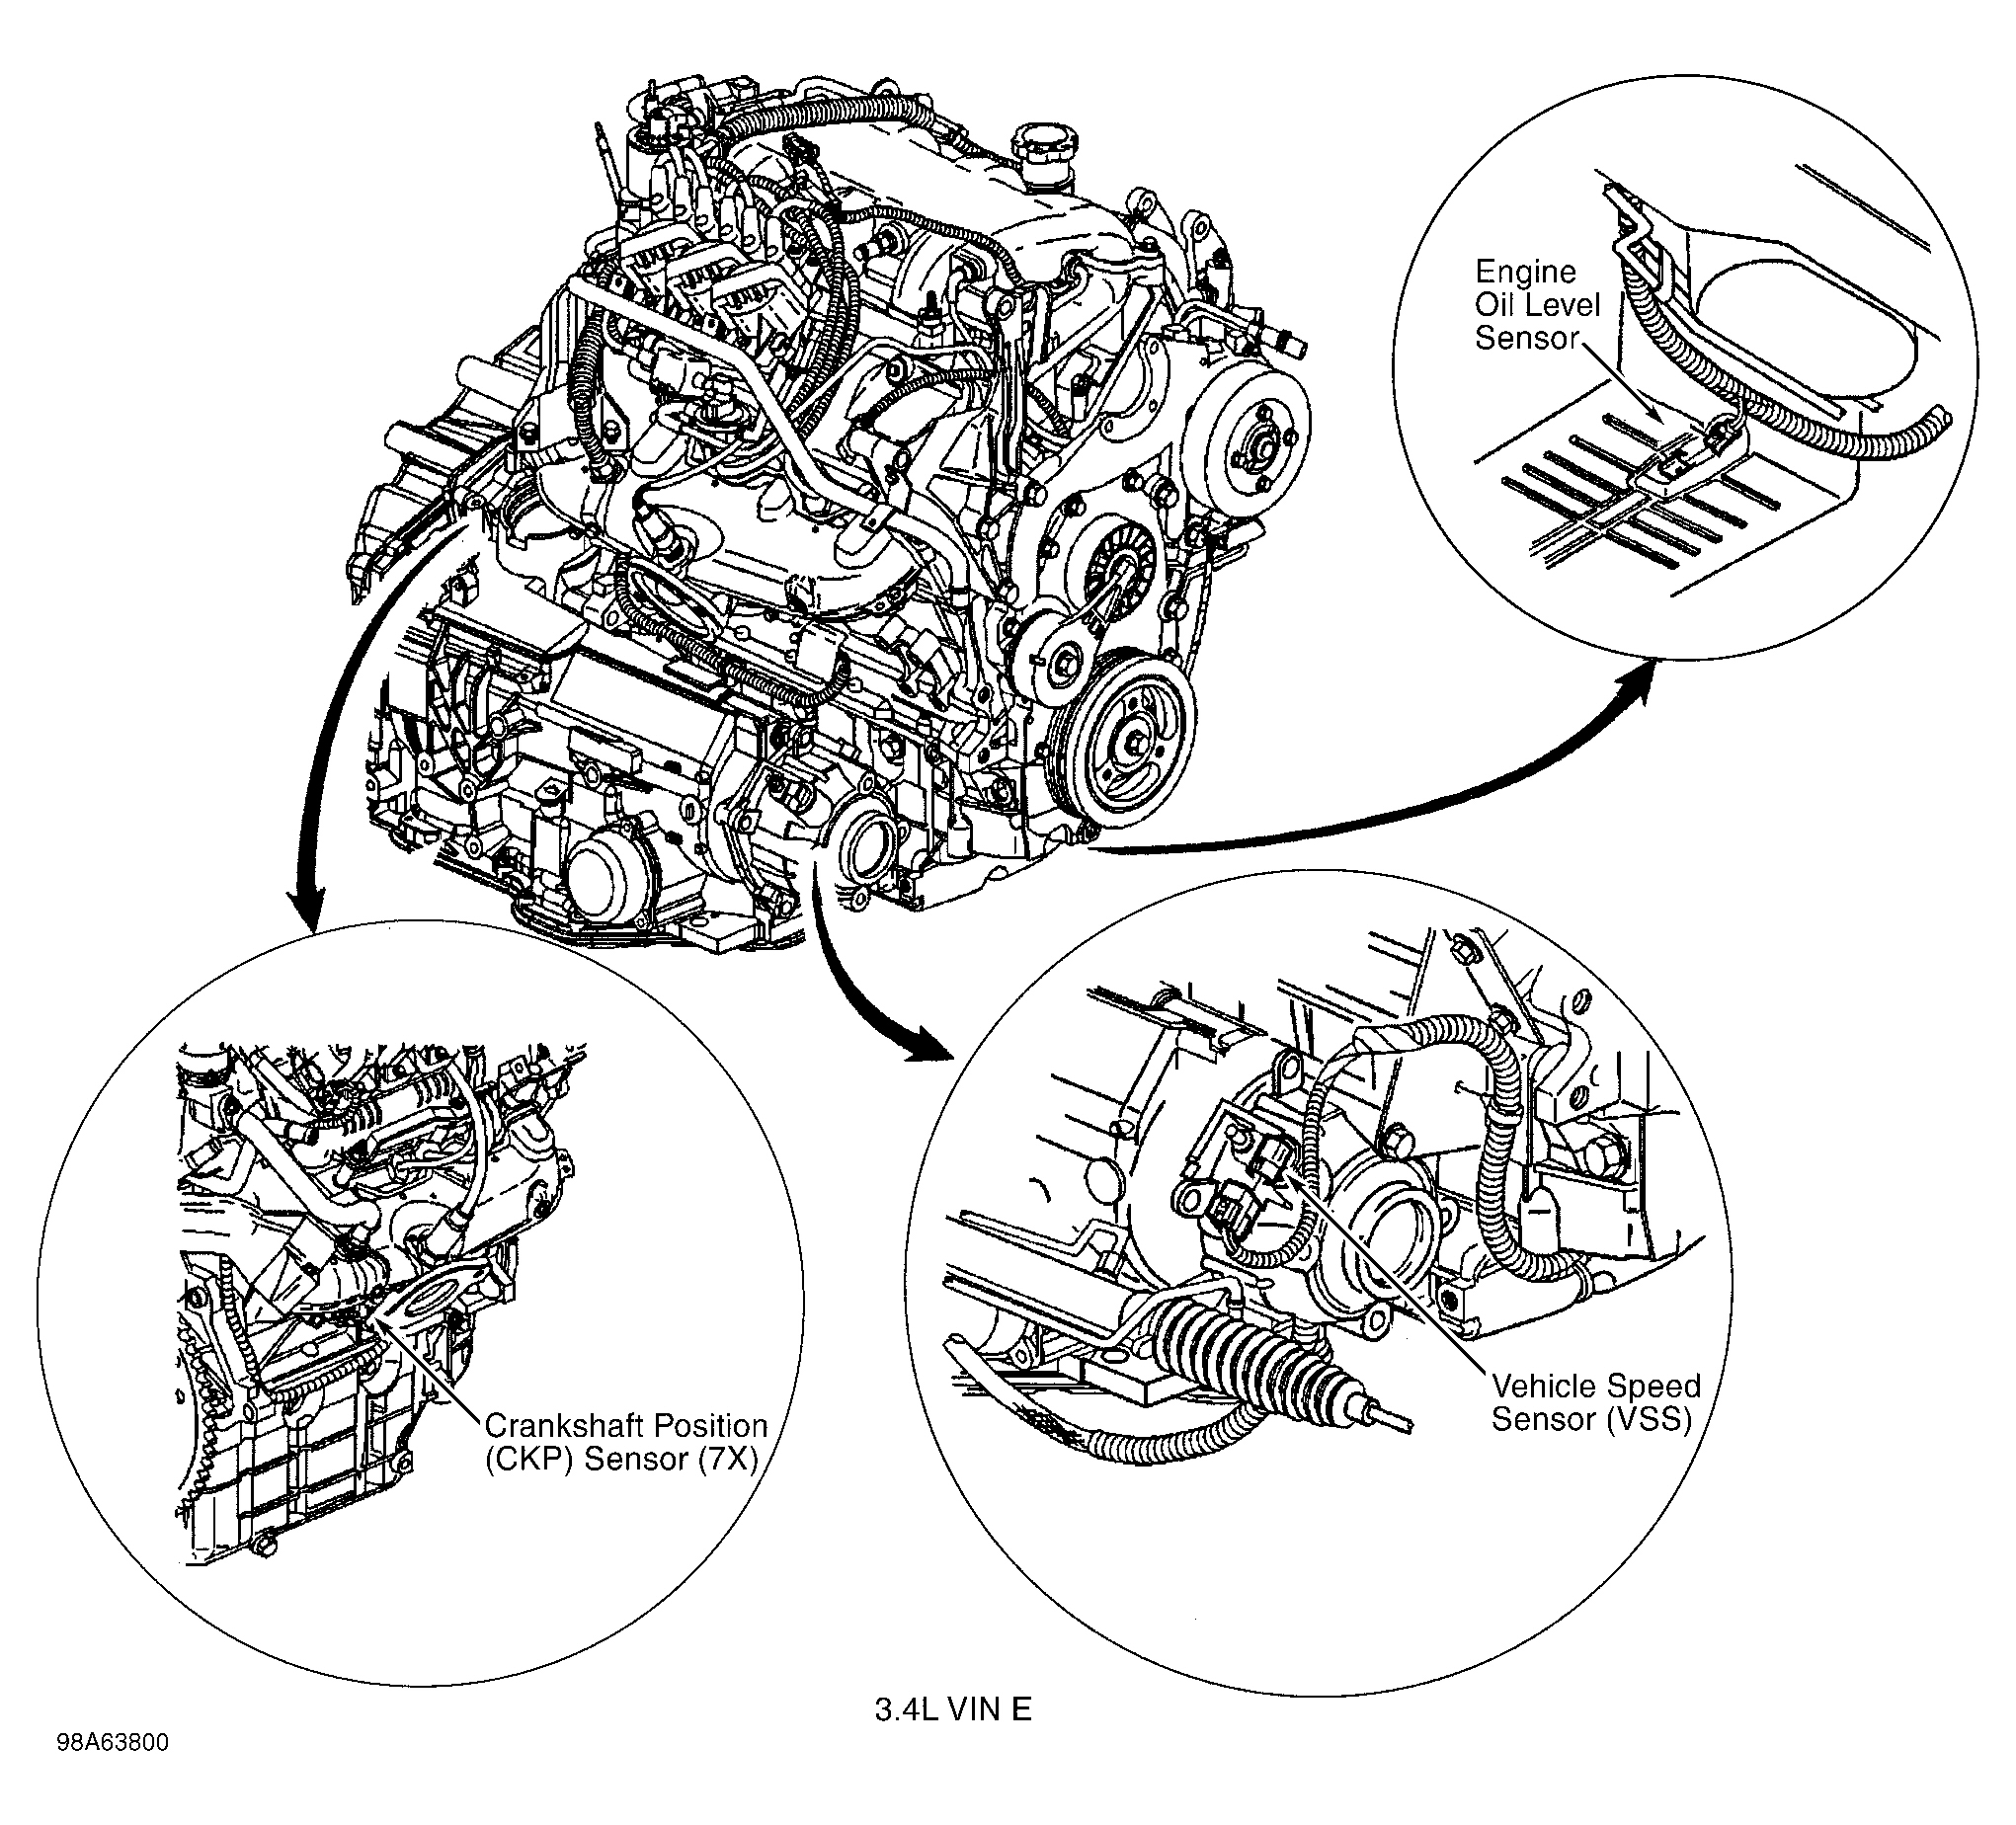 Chevrolet Monte Carlo SS 2001 - Component Locations -  Right Side Of Engine (3.4L VIN E)